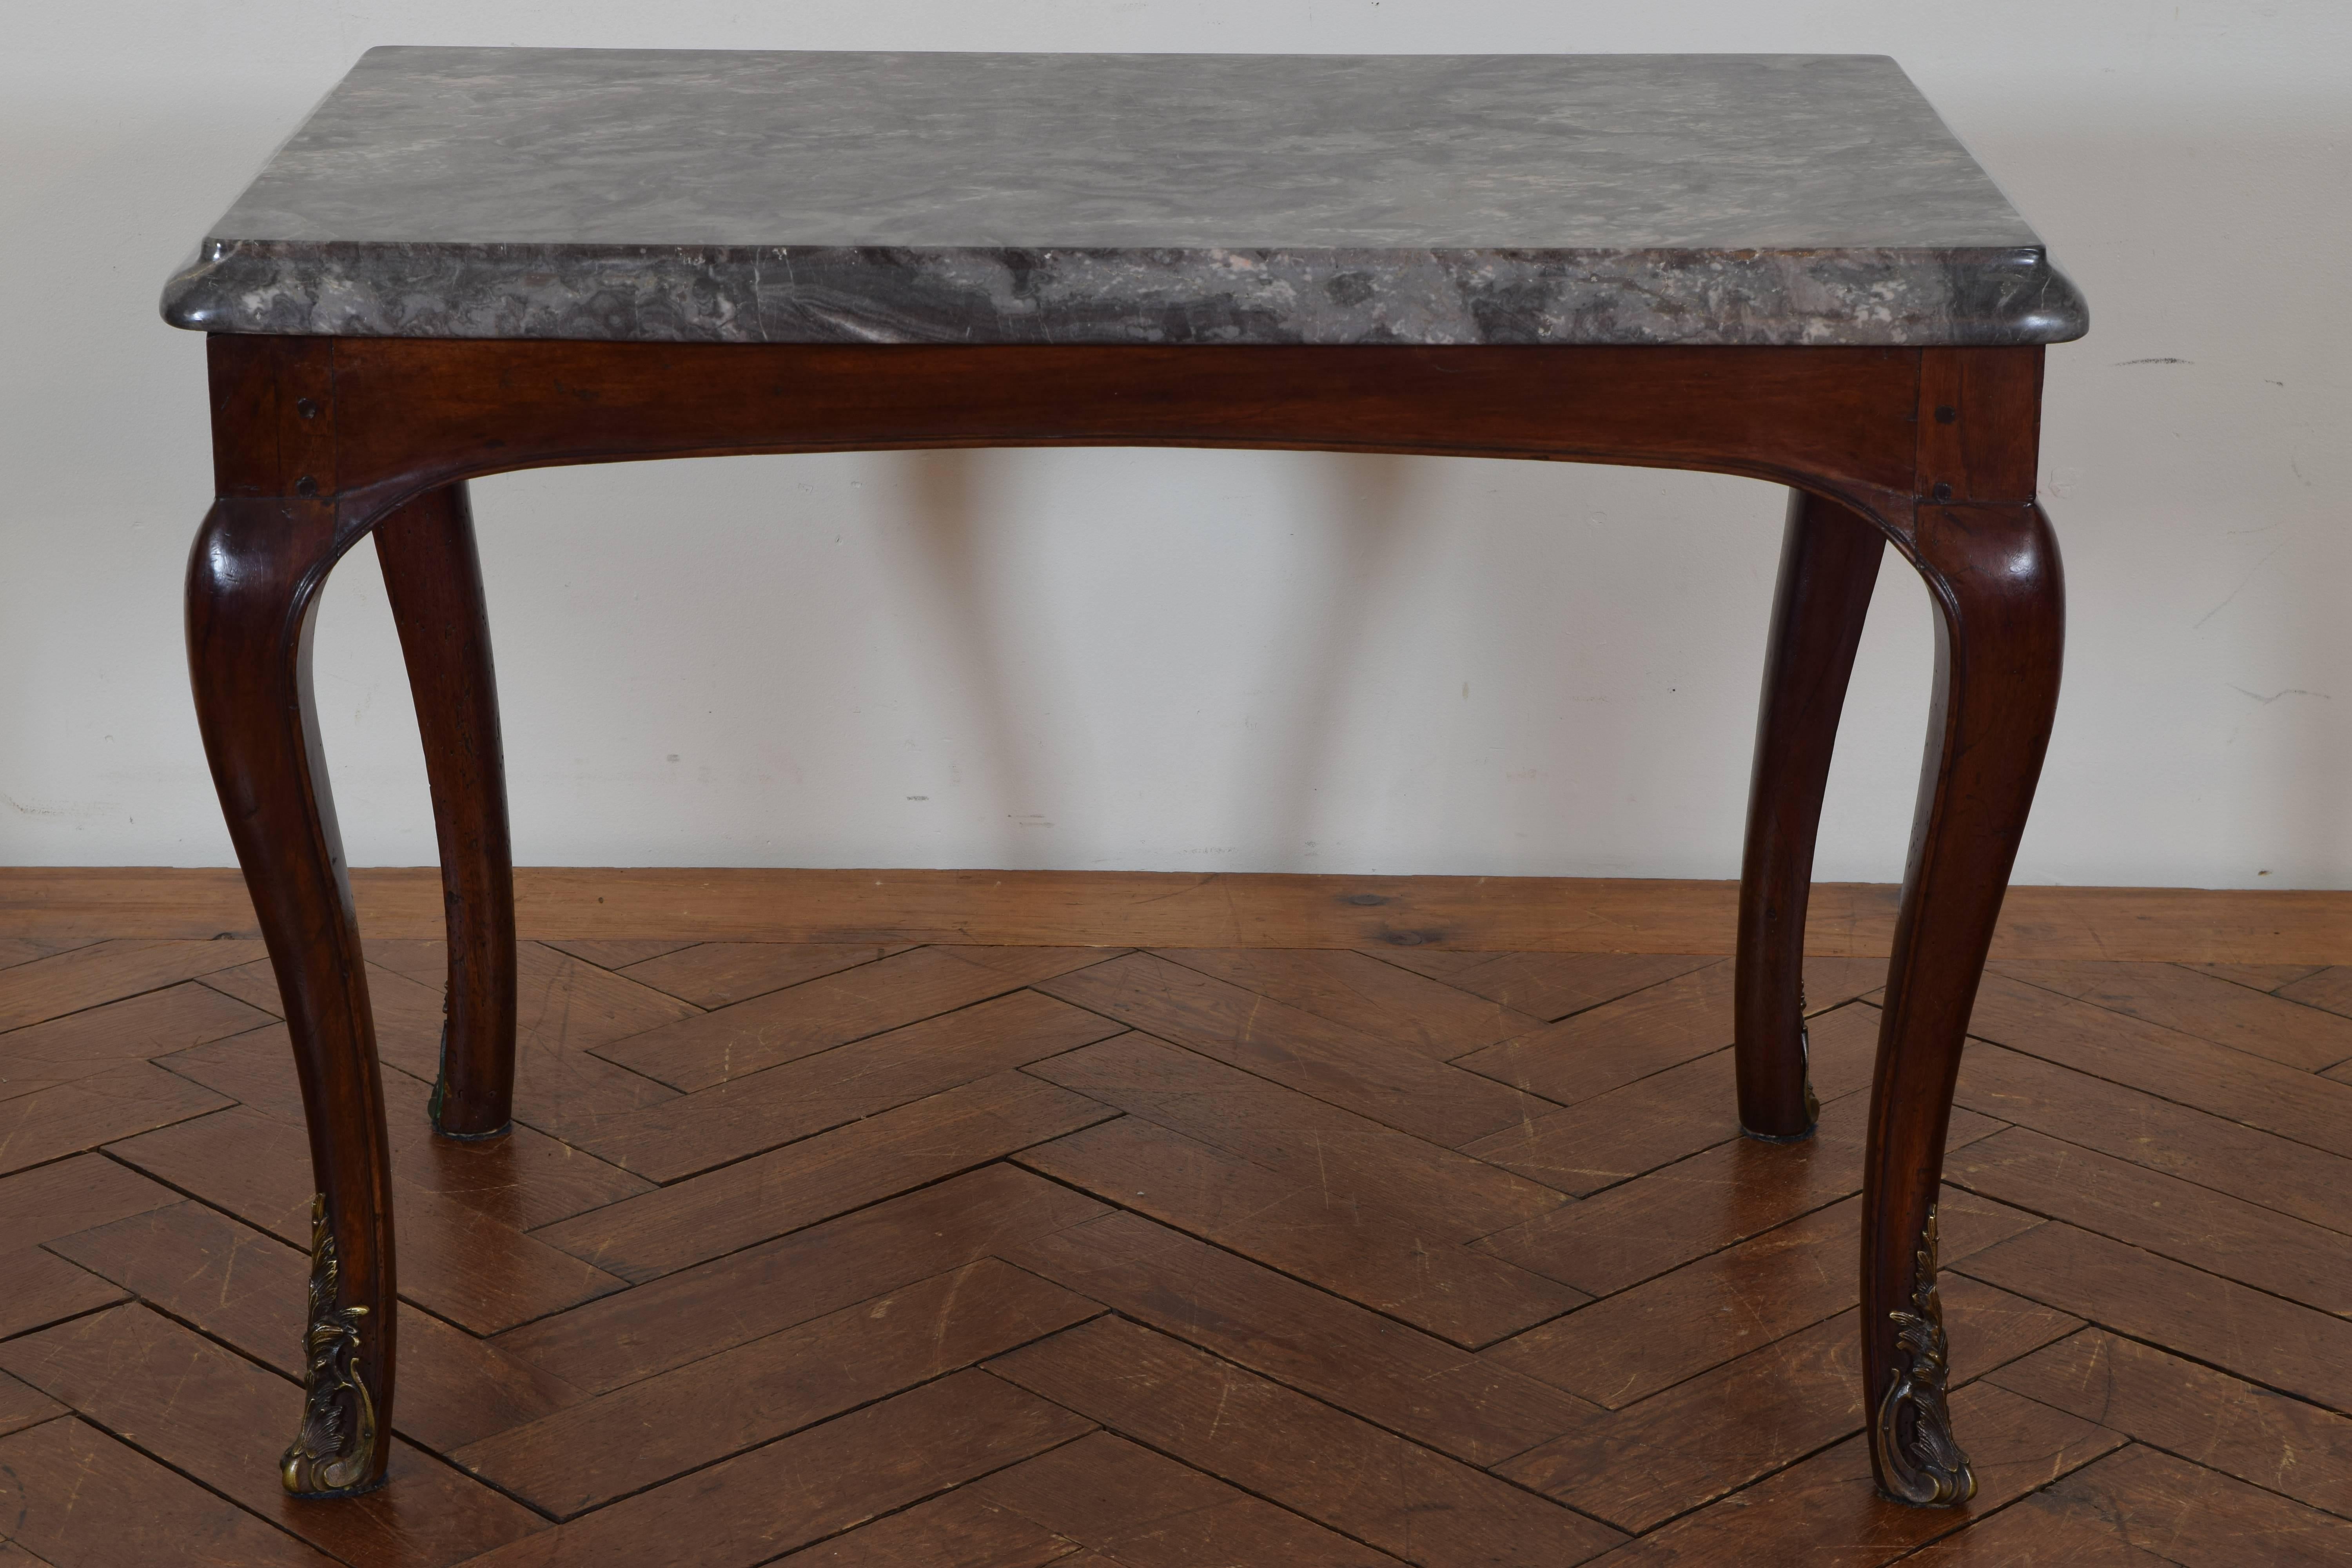 The thick marble-top with a rounded molded edge atop a frame with shaped apron and cabriole legs mounted with bronze sabots.